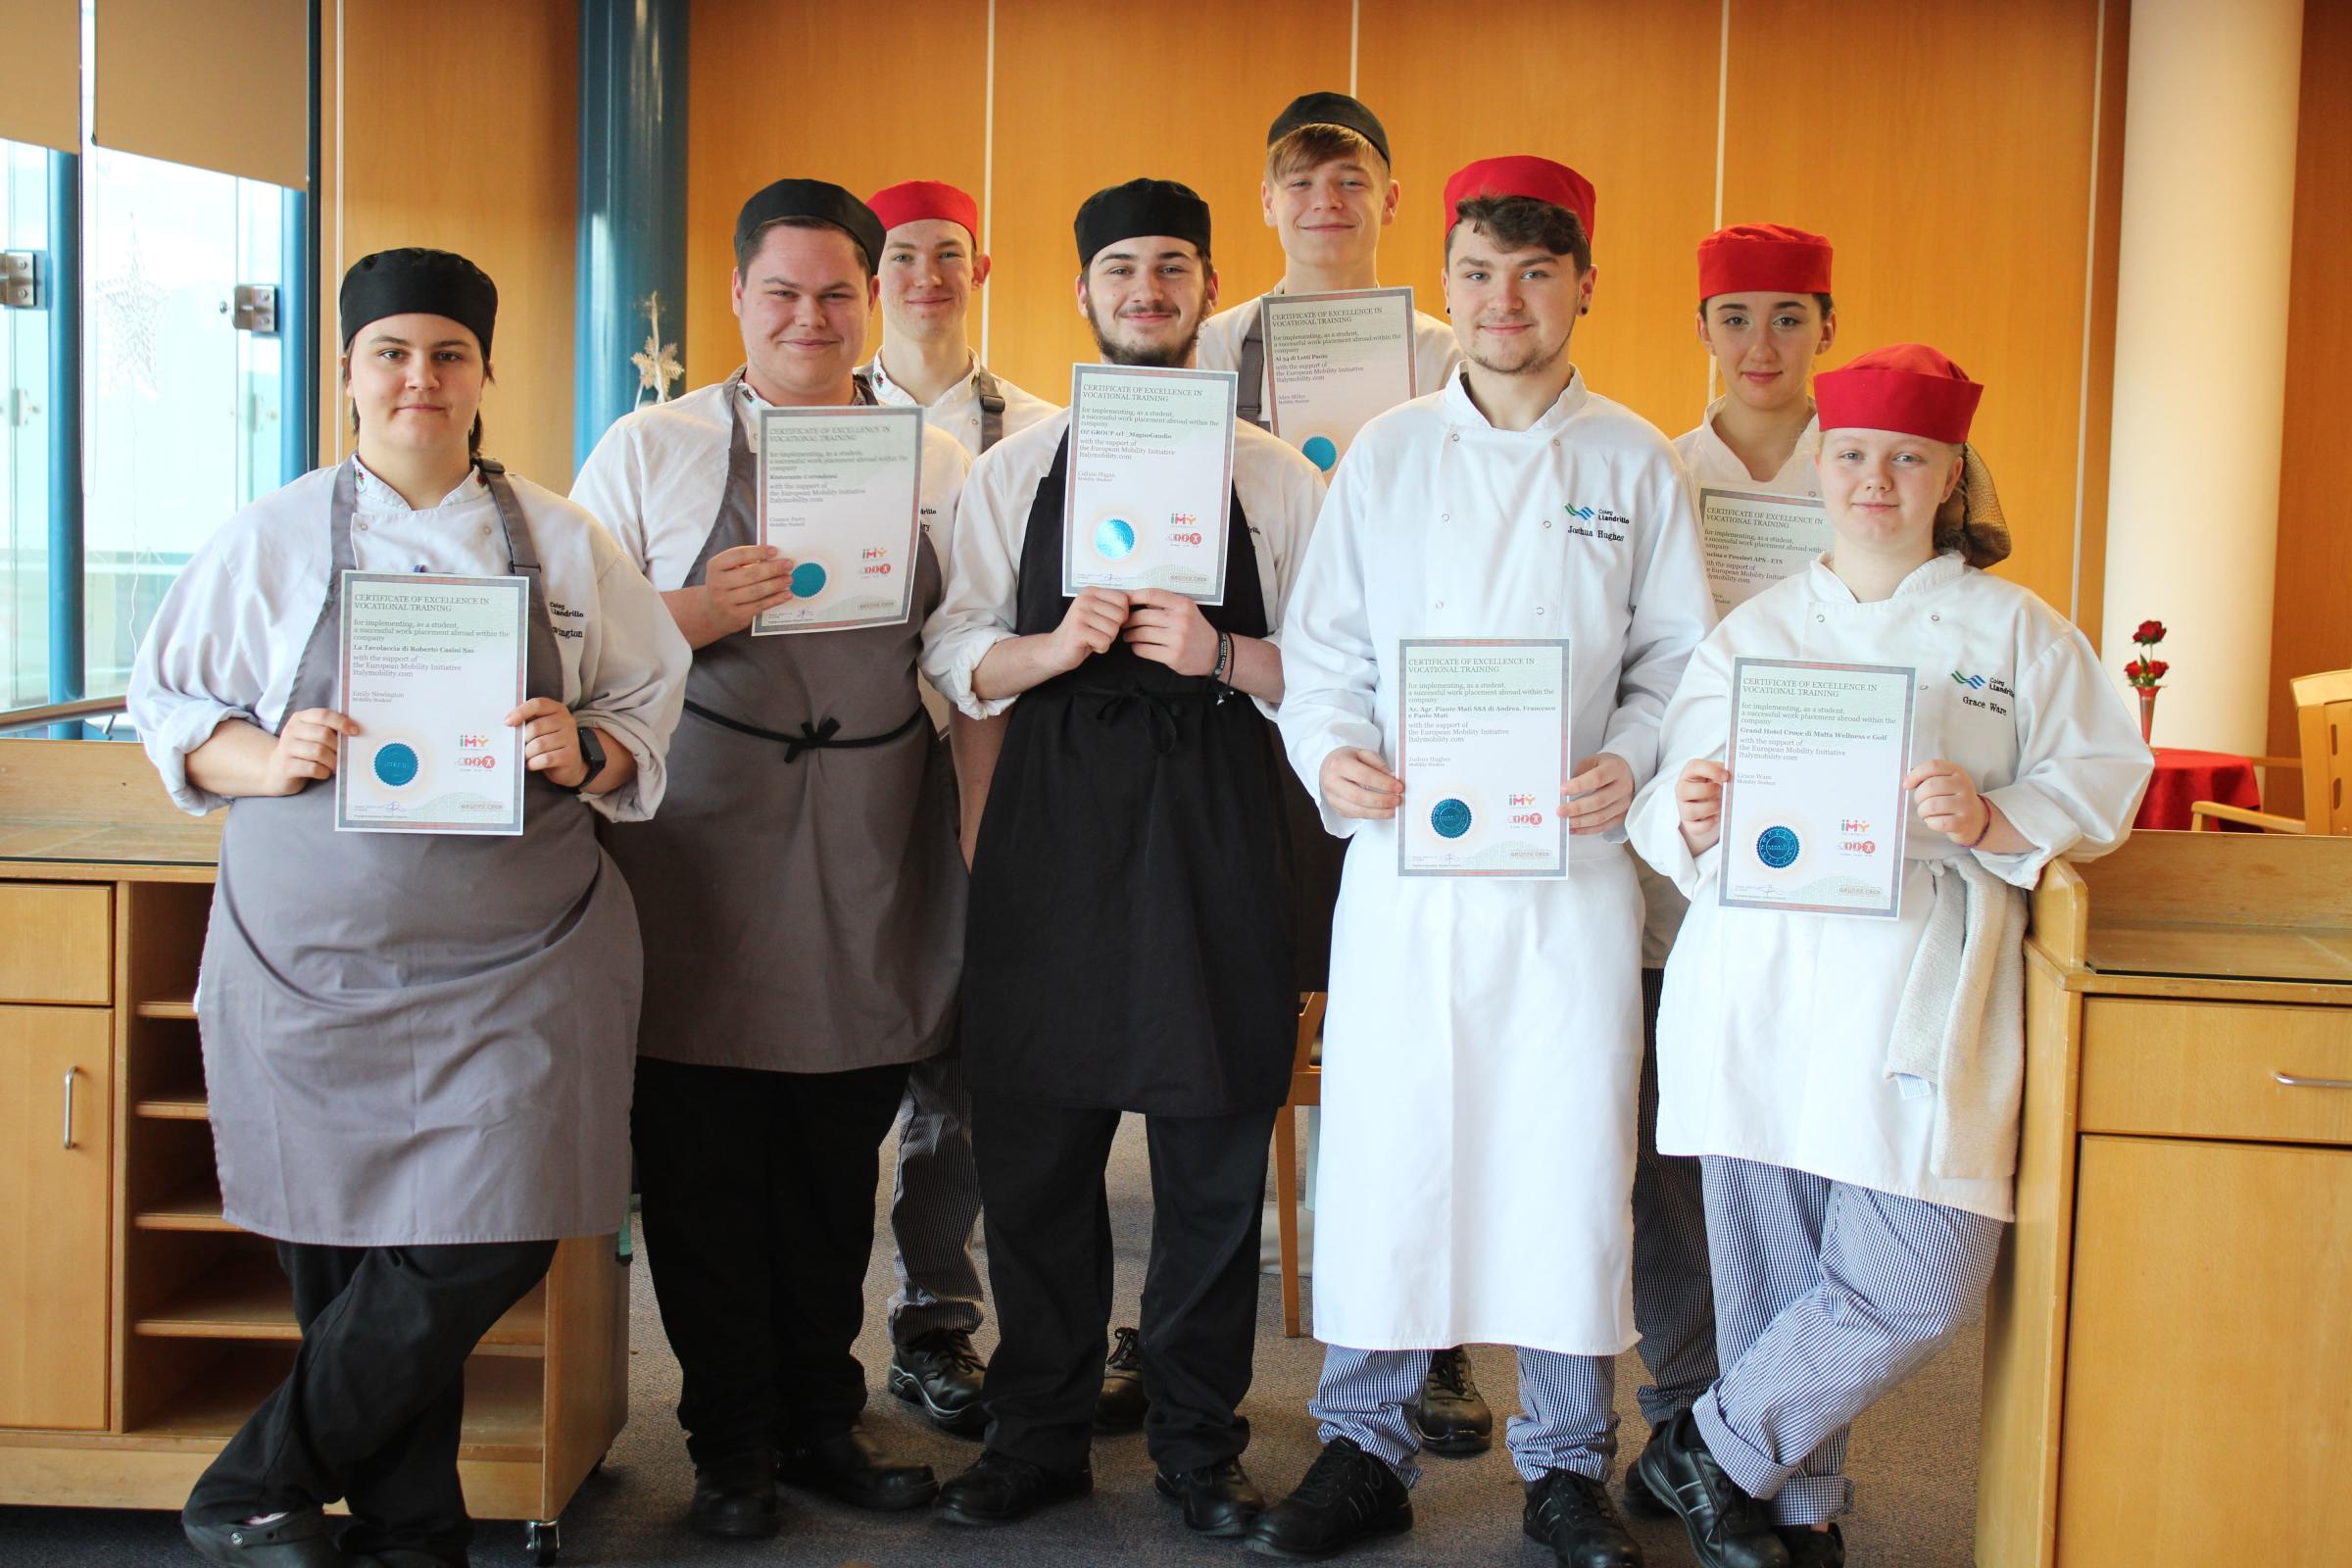 Coleg Llandrillo students with their certificates after completing work experience placements in Tuscany, Italy.